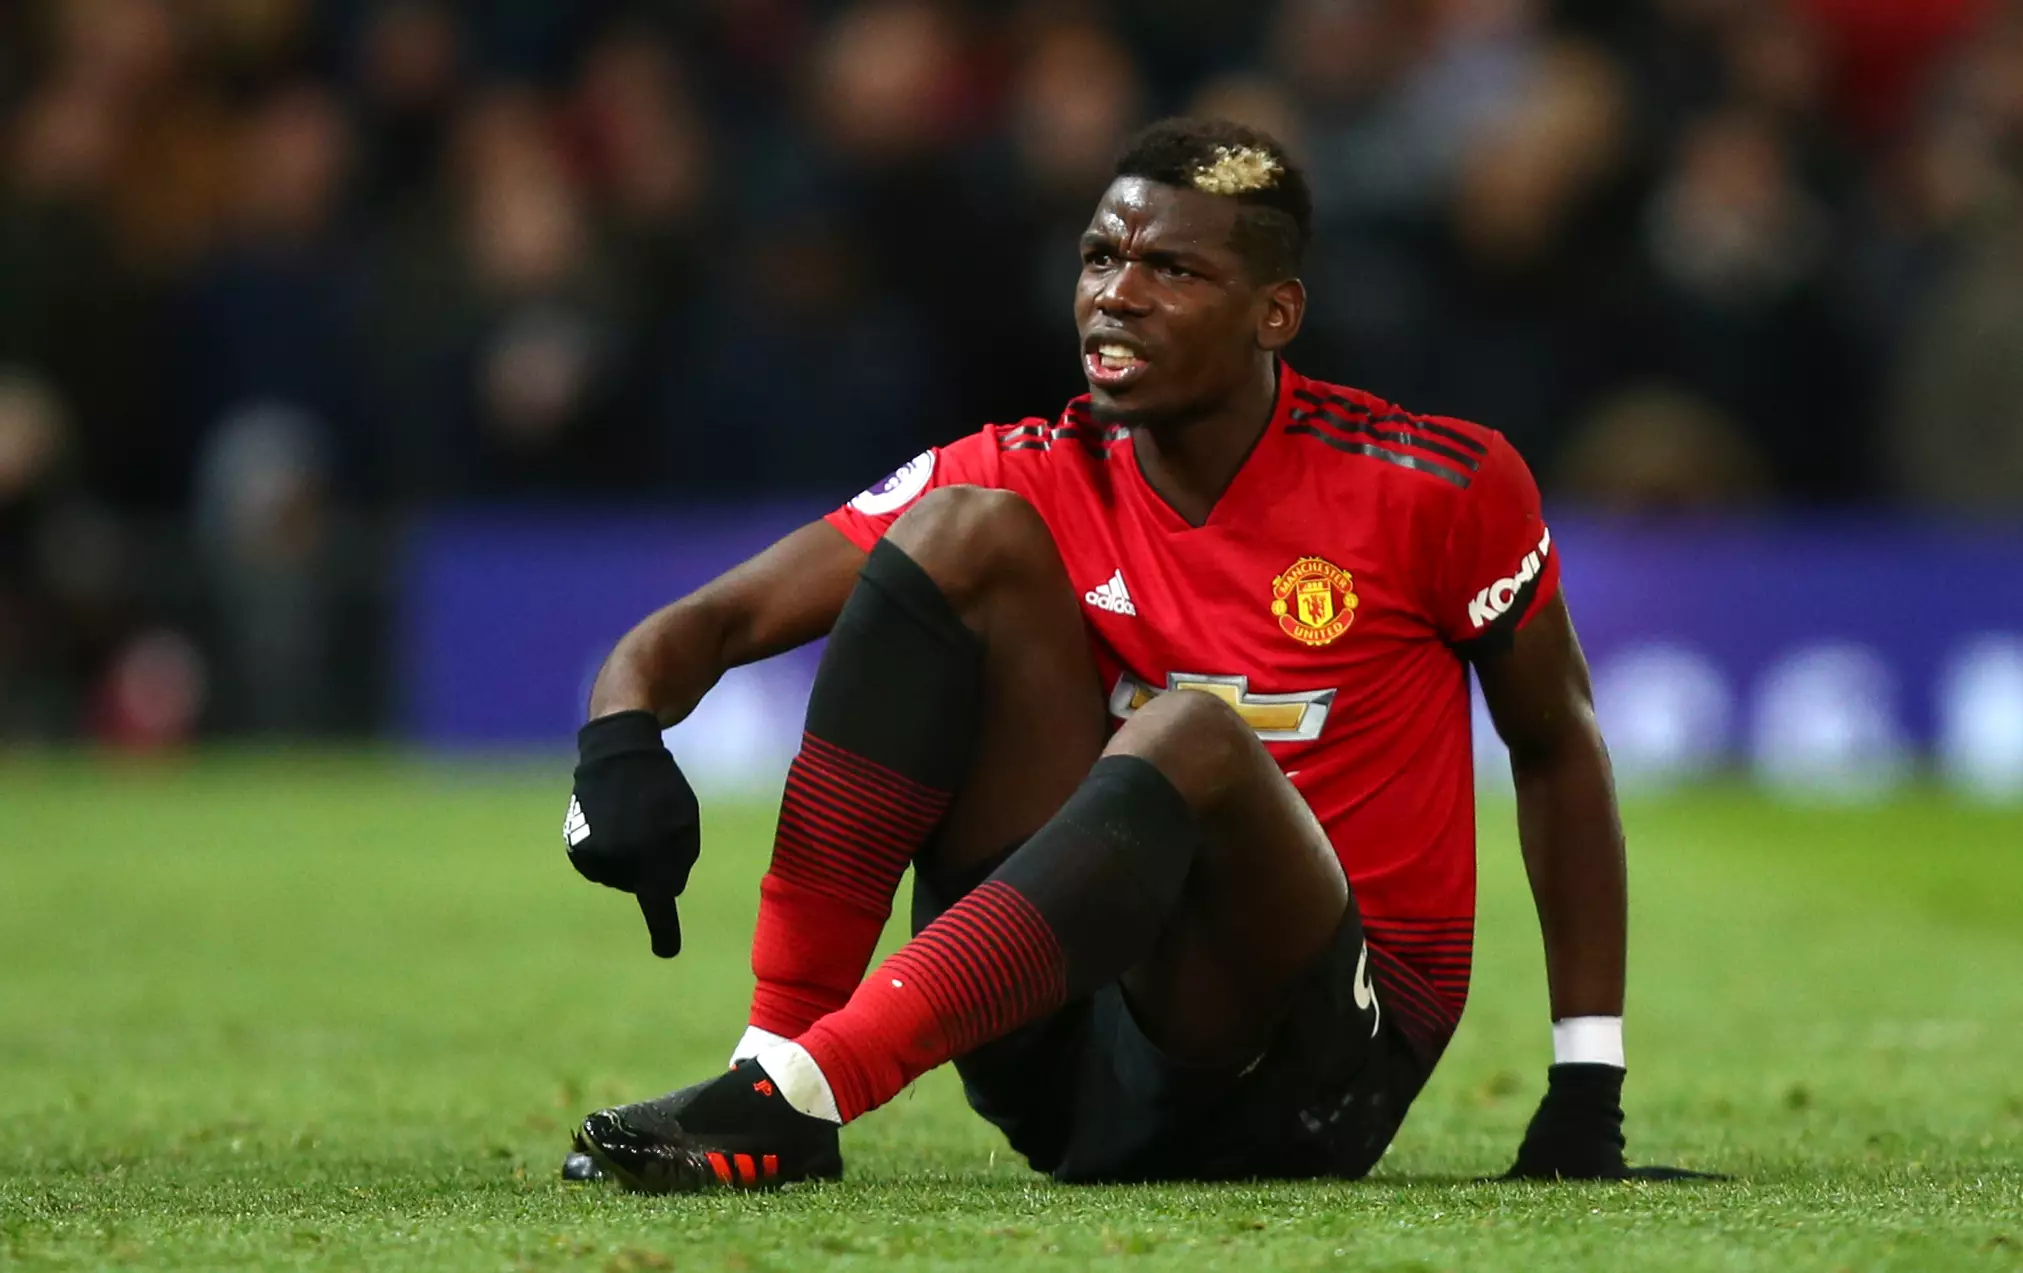 Paul Pogba and Manchester United Will Feature in PES 2020.